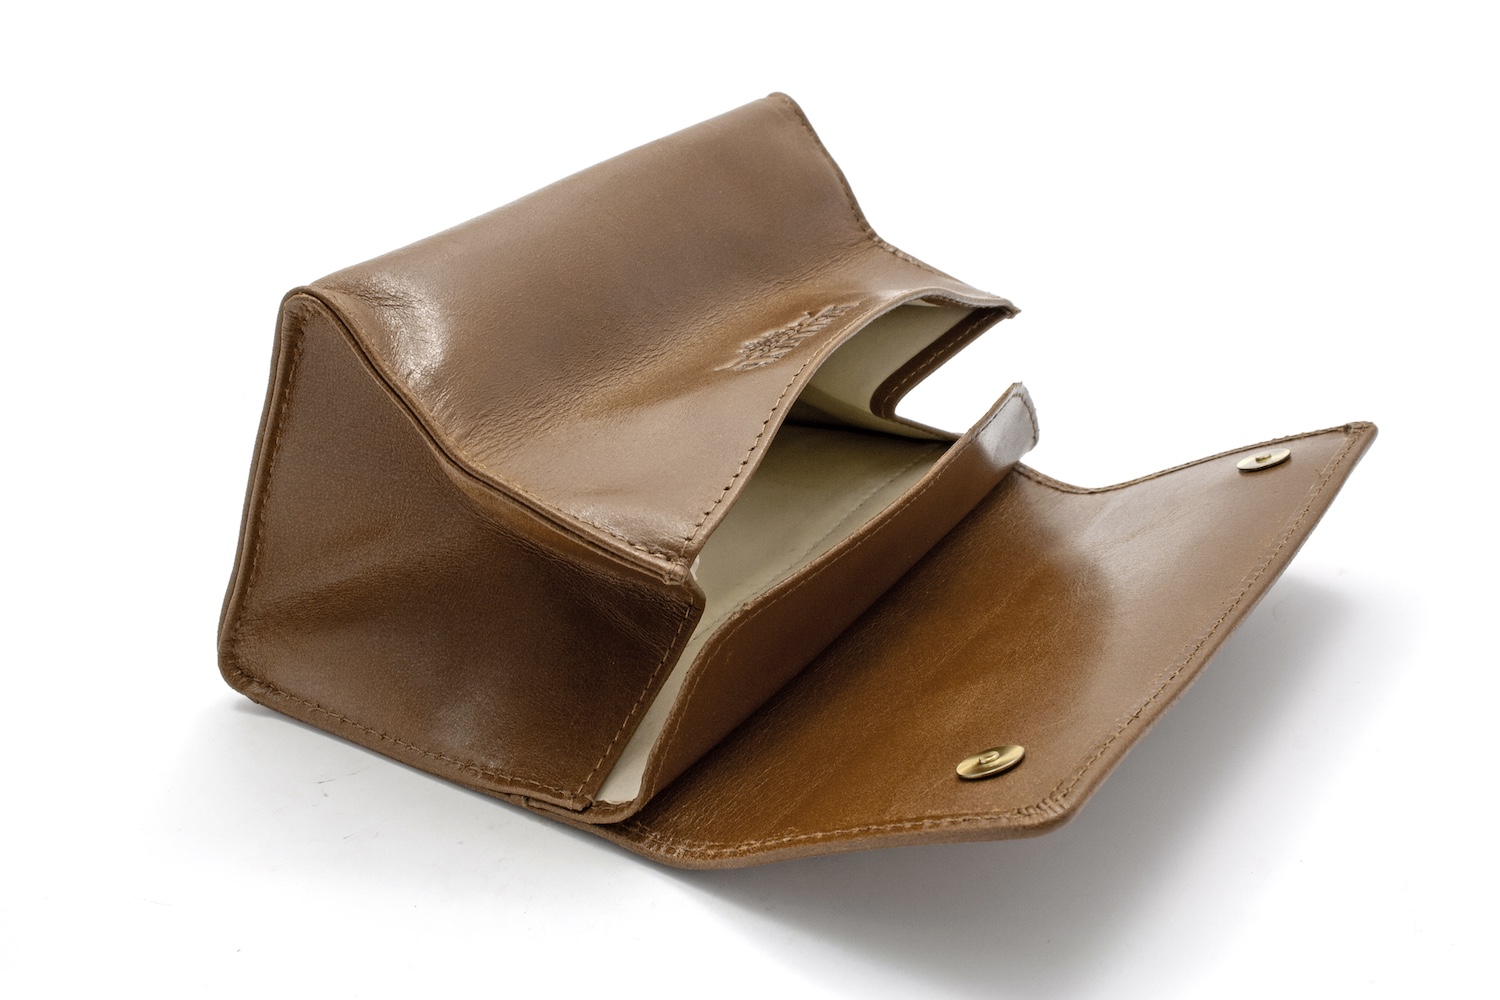 Rattray's Whisky Tobacco Pouch 3 - Large Stand up